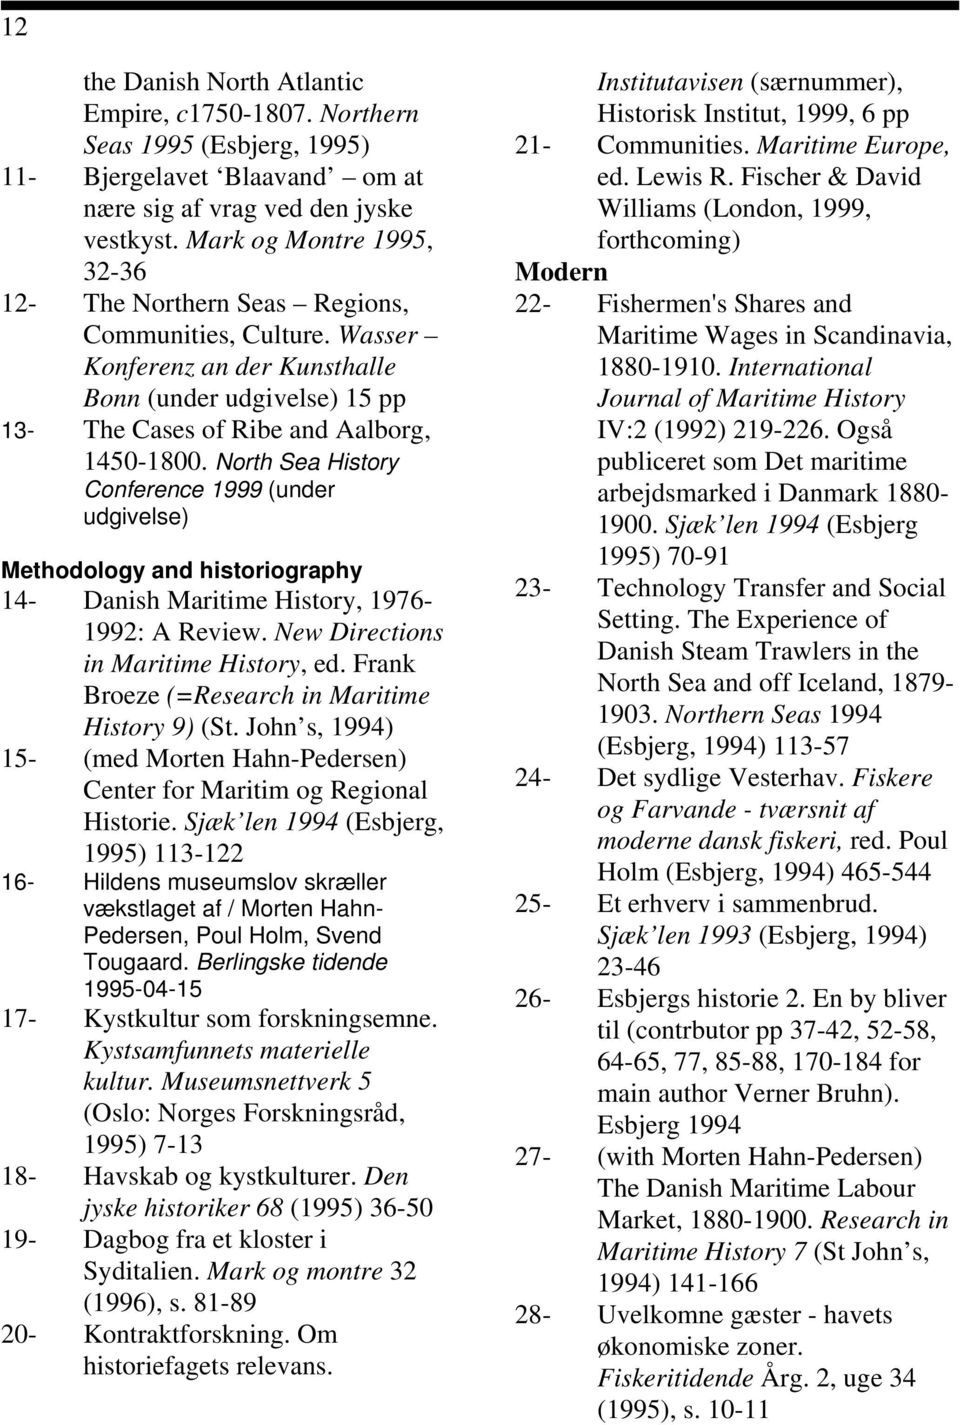 North Sea History Conference 1999 (under udgivelse) Methodology and historiography 14- Danish Maritime History, 1976-1992: A Review. New Directions in Maritime History, ed.